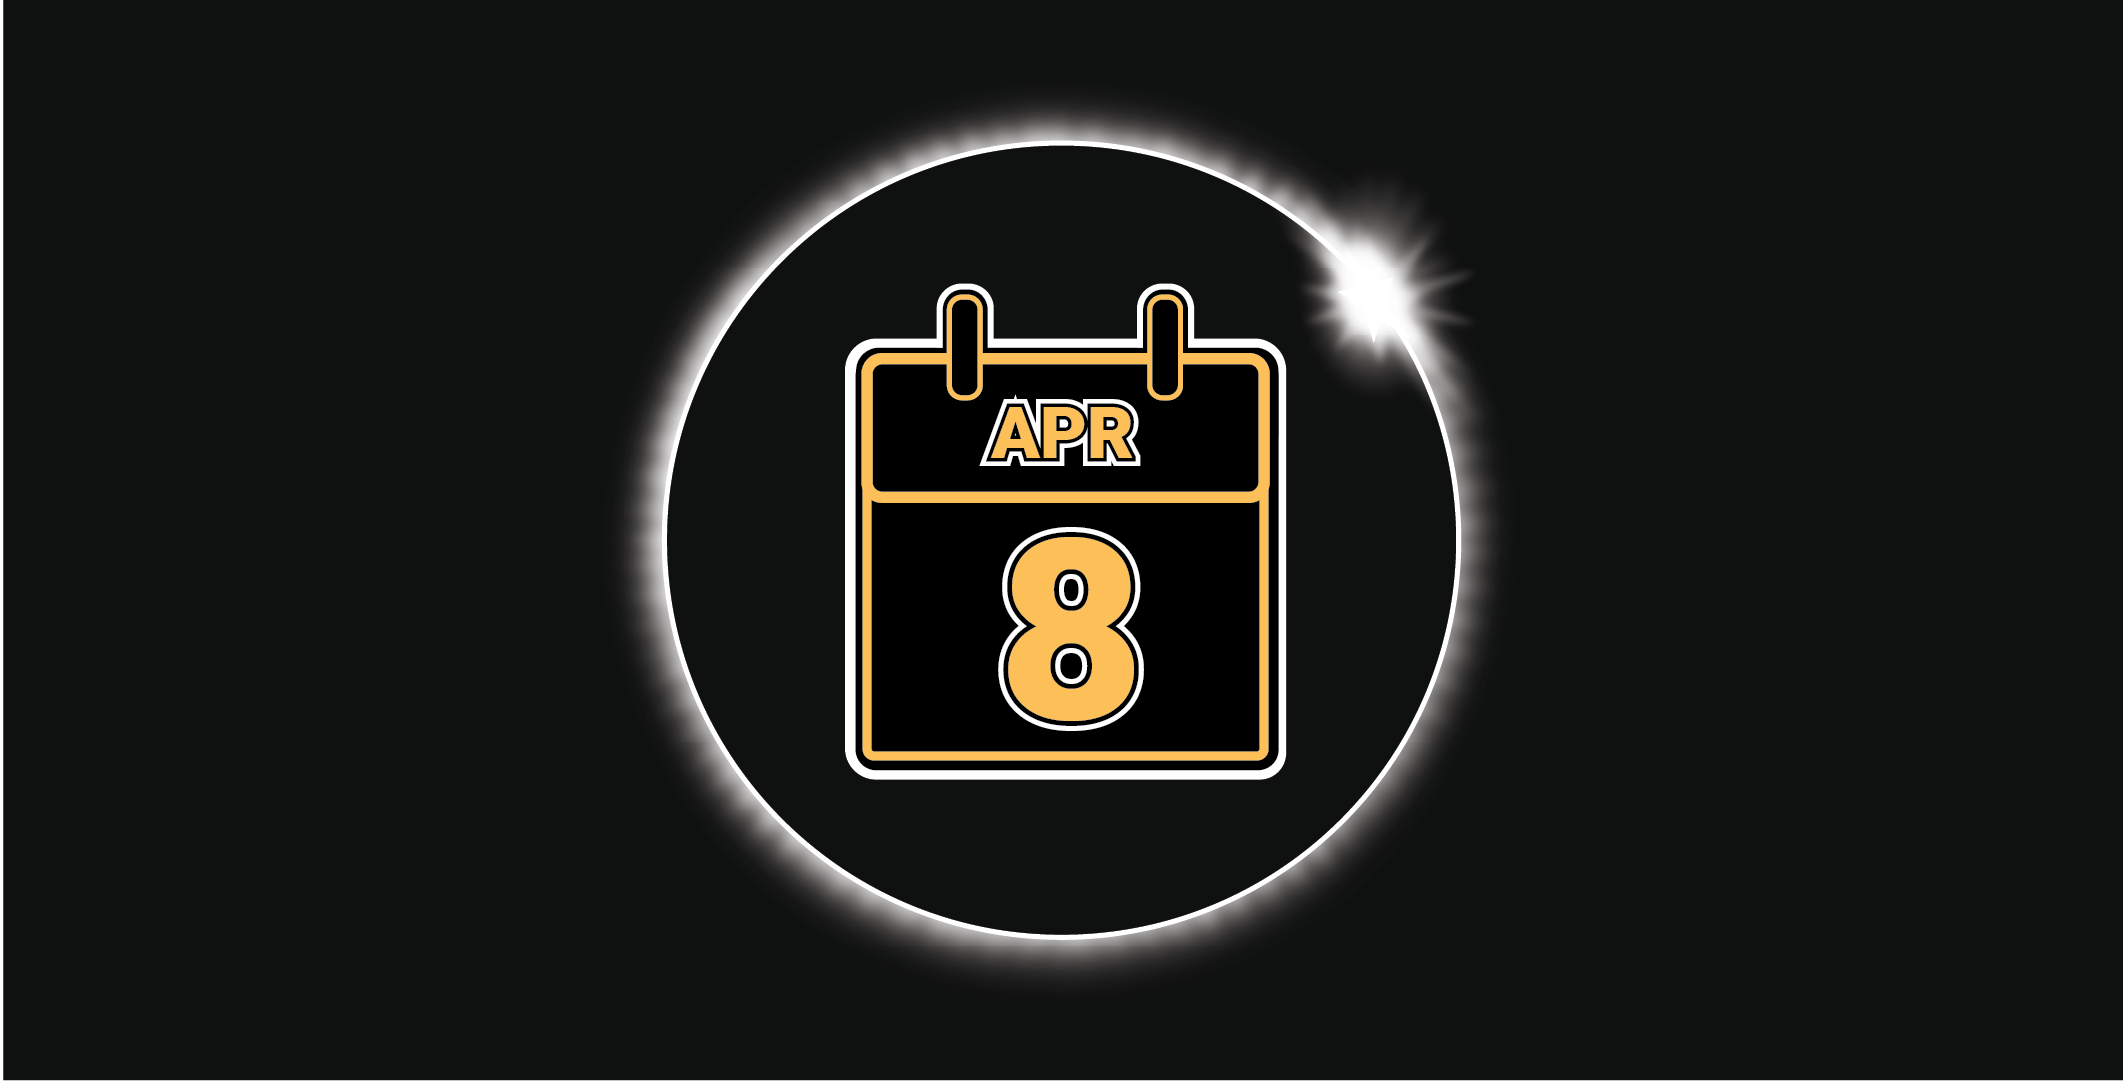 A calendar marked as April 8 against an eclipse graphic.